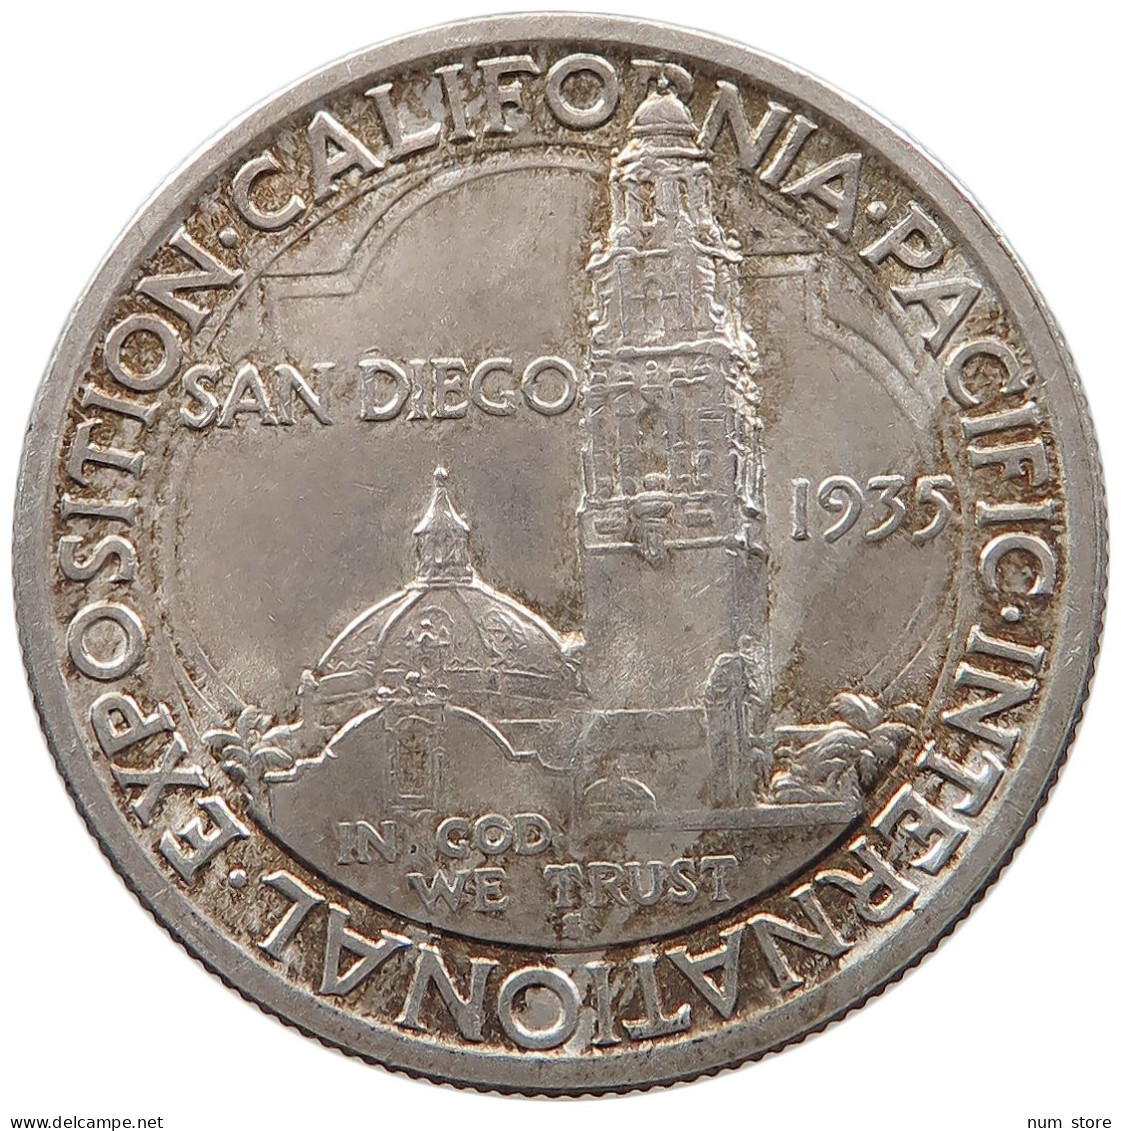 UNITED STATES OF AMERICA HALF 1/2 DOLLAR 1935 SAN DIEGO #t127 0421 - Unclassified